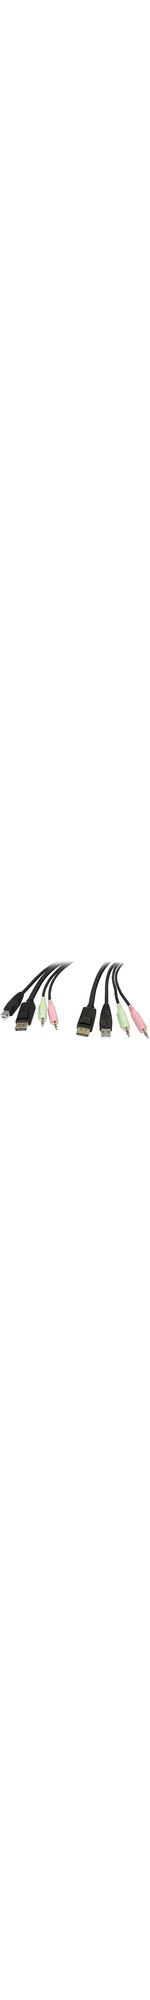 StarTech.com 6ft 4-in-1 USB DisplayPort KVM Switch Cable w/ Audio Andamp; Microphone